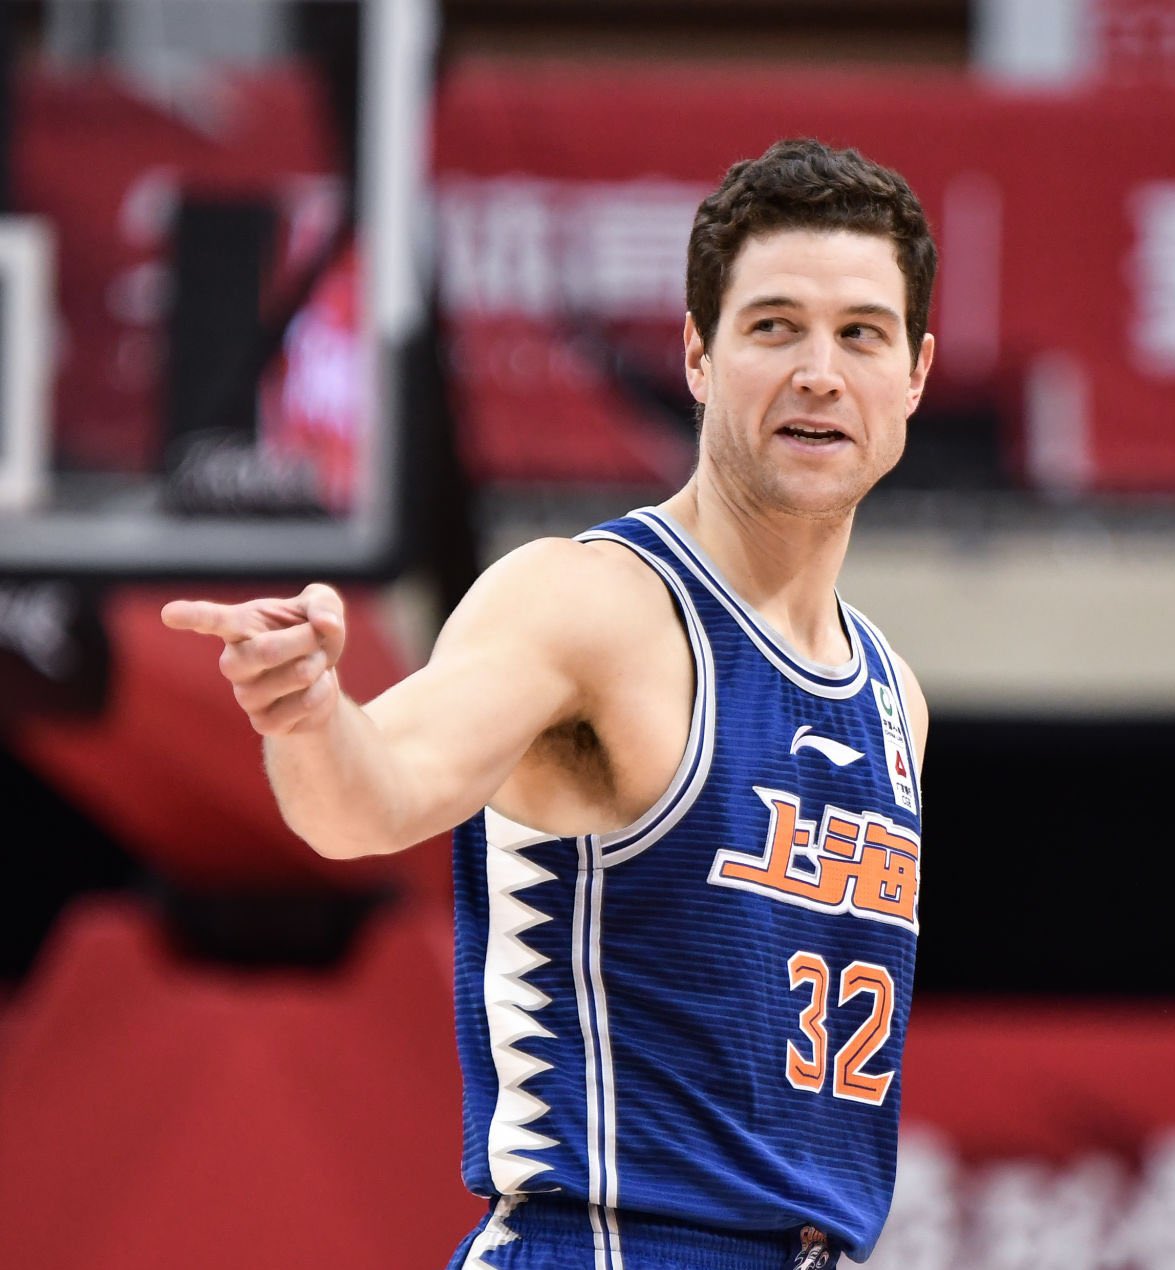 Jimmer Fredette says returning to the NBA is 'not the goal.' So what is?